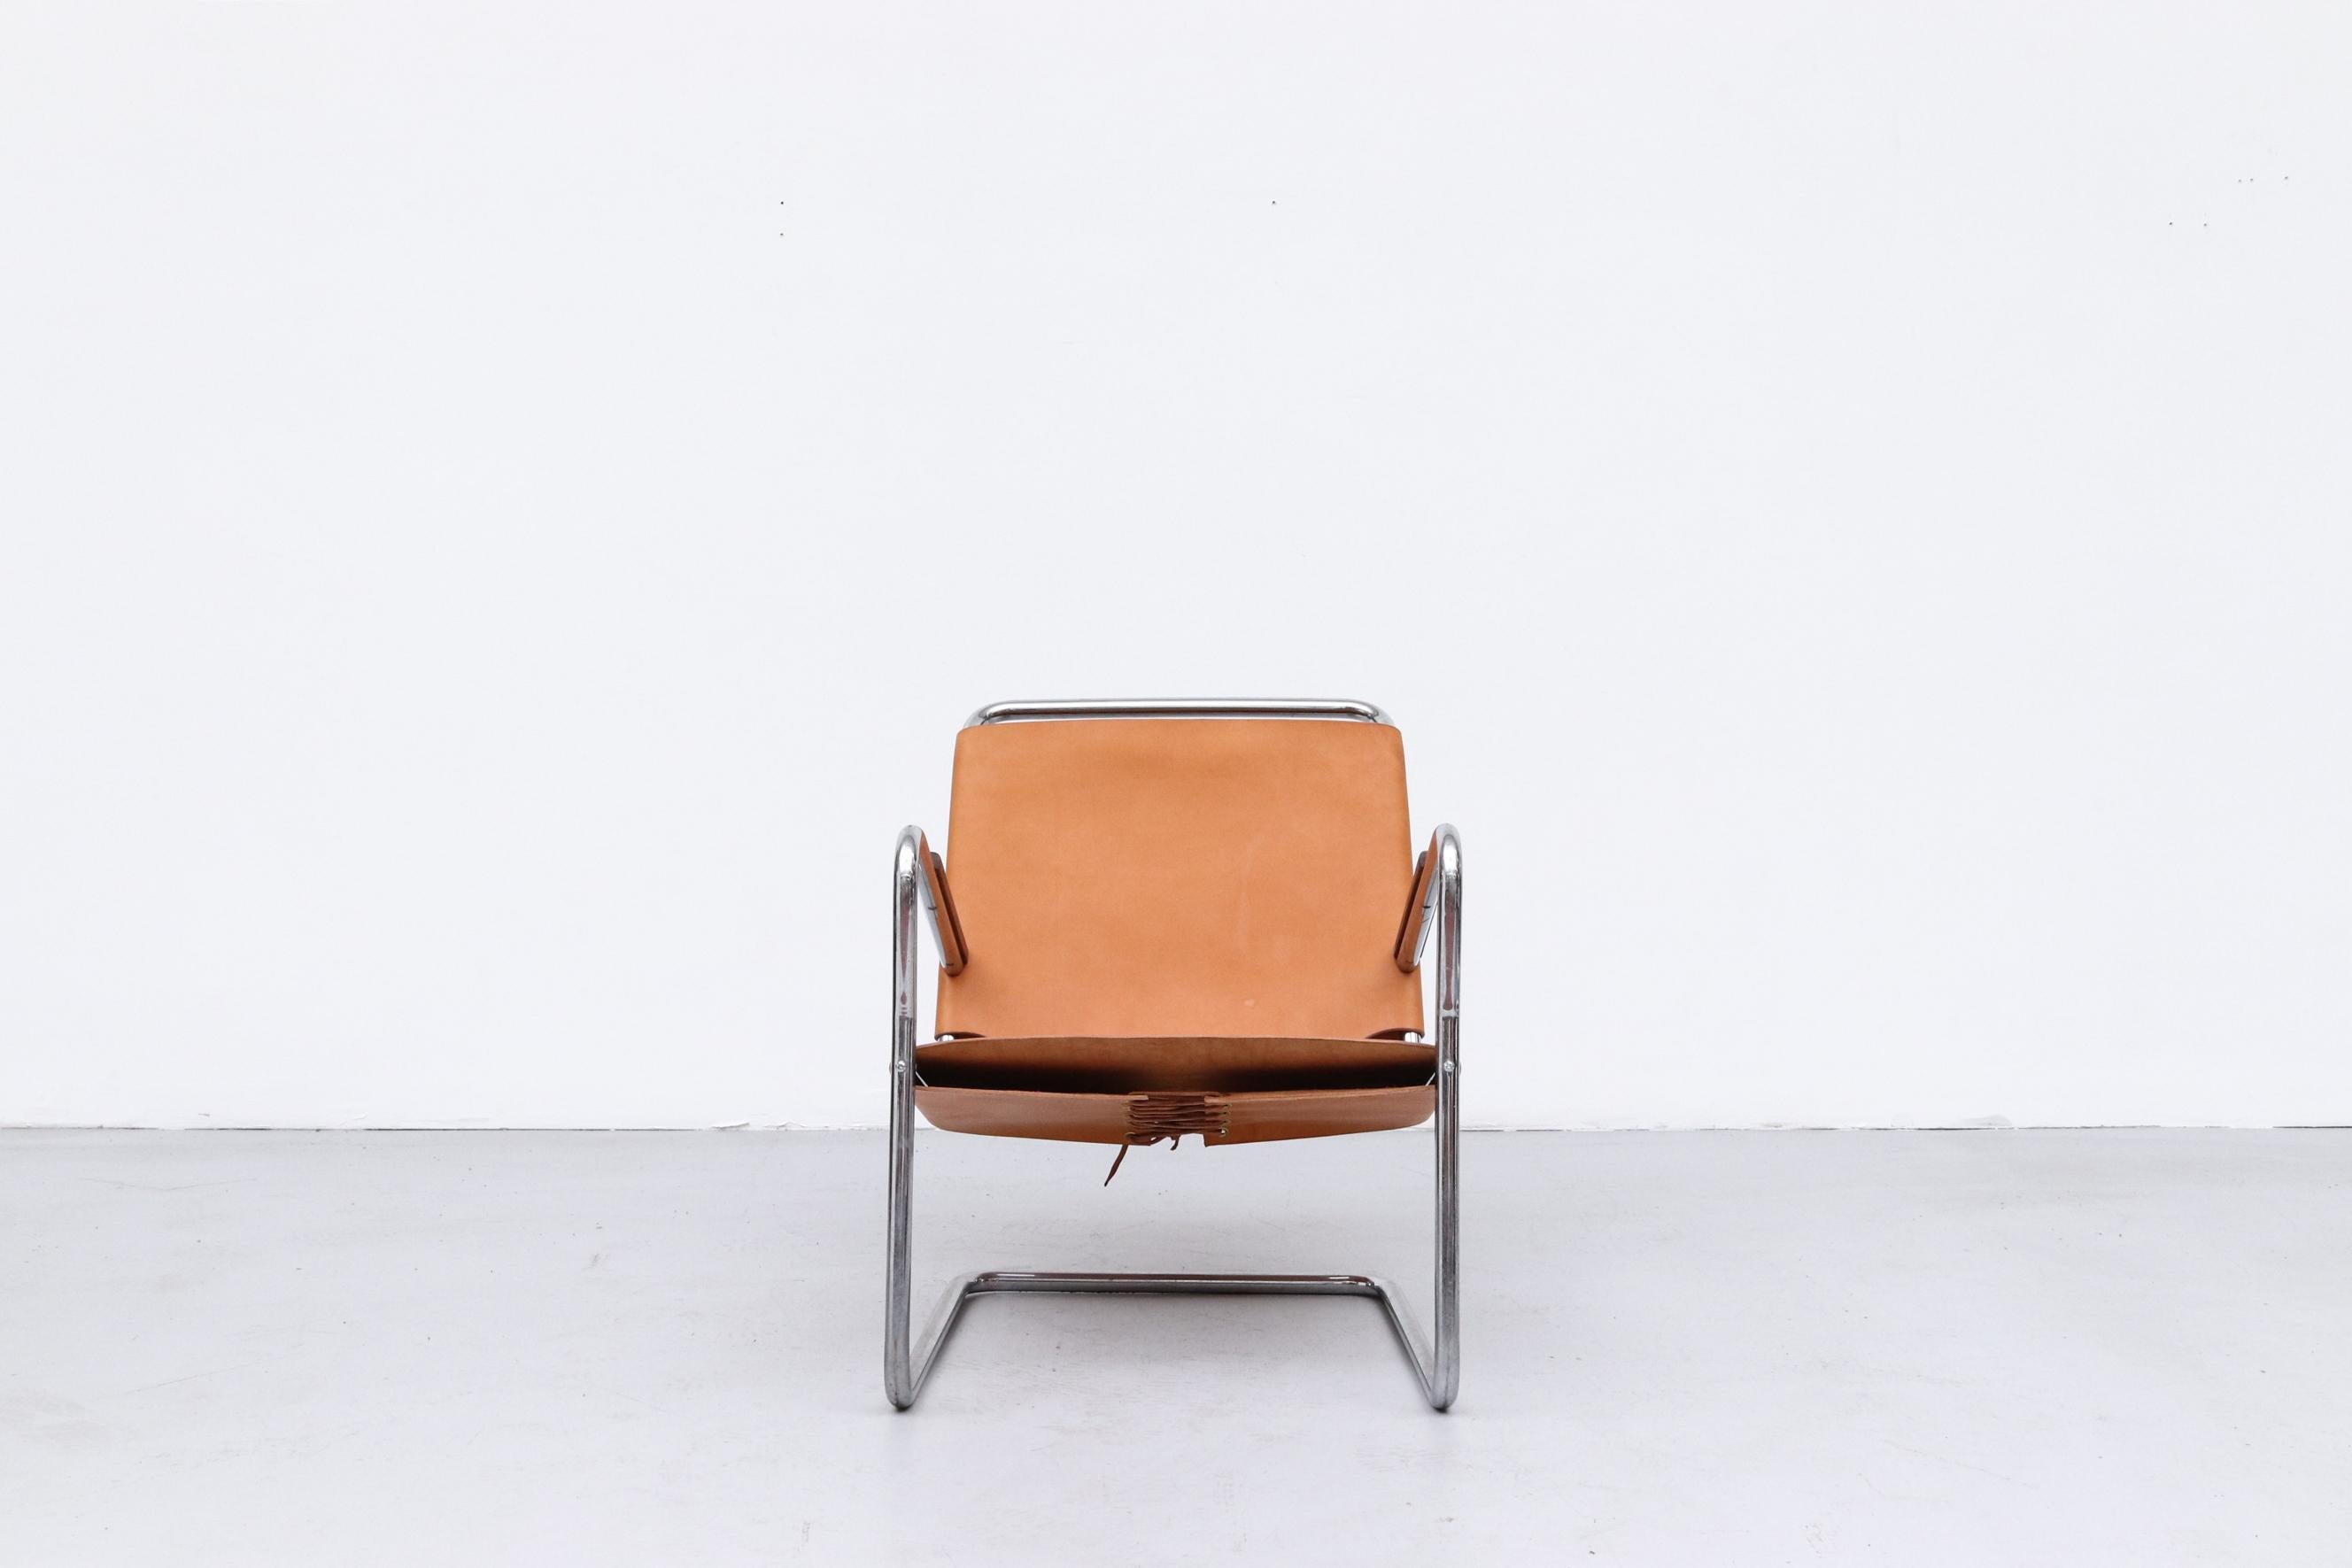 1930's Bas Van Pelt Leather and Chrome Tubular Lounge Chair with Wood armrests and New Natural Leather Seating with laced leather closure in back. 
Van Pelt was a forward-thinking designer in his day and  only designed in a style that was similar to